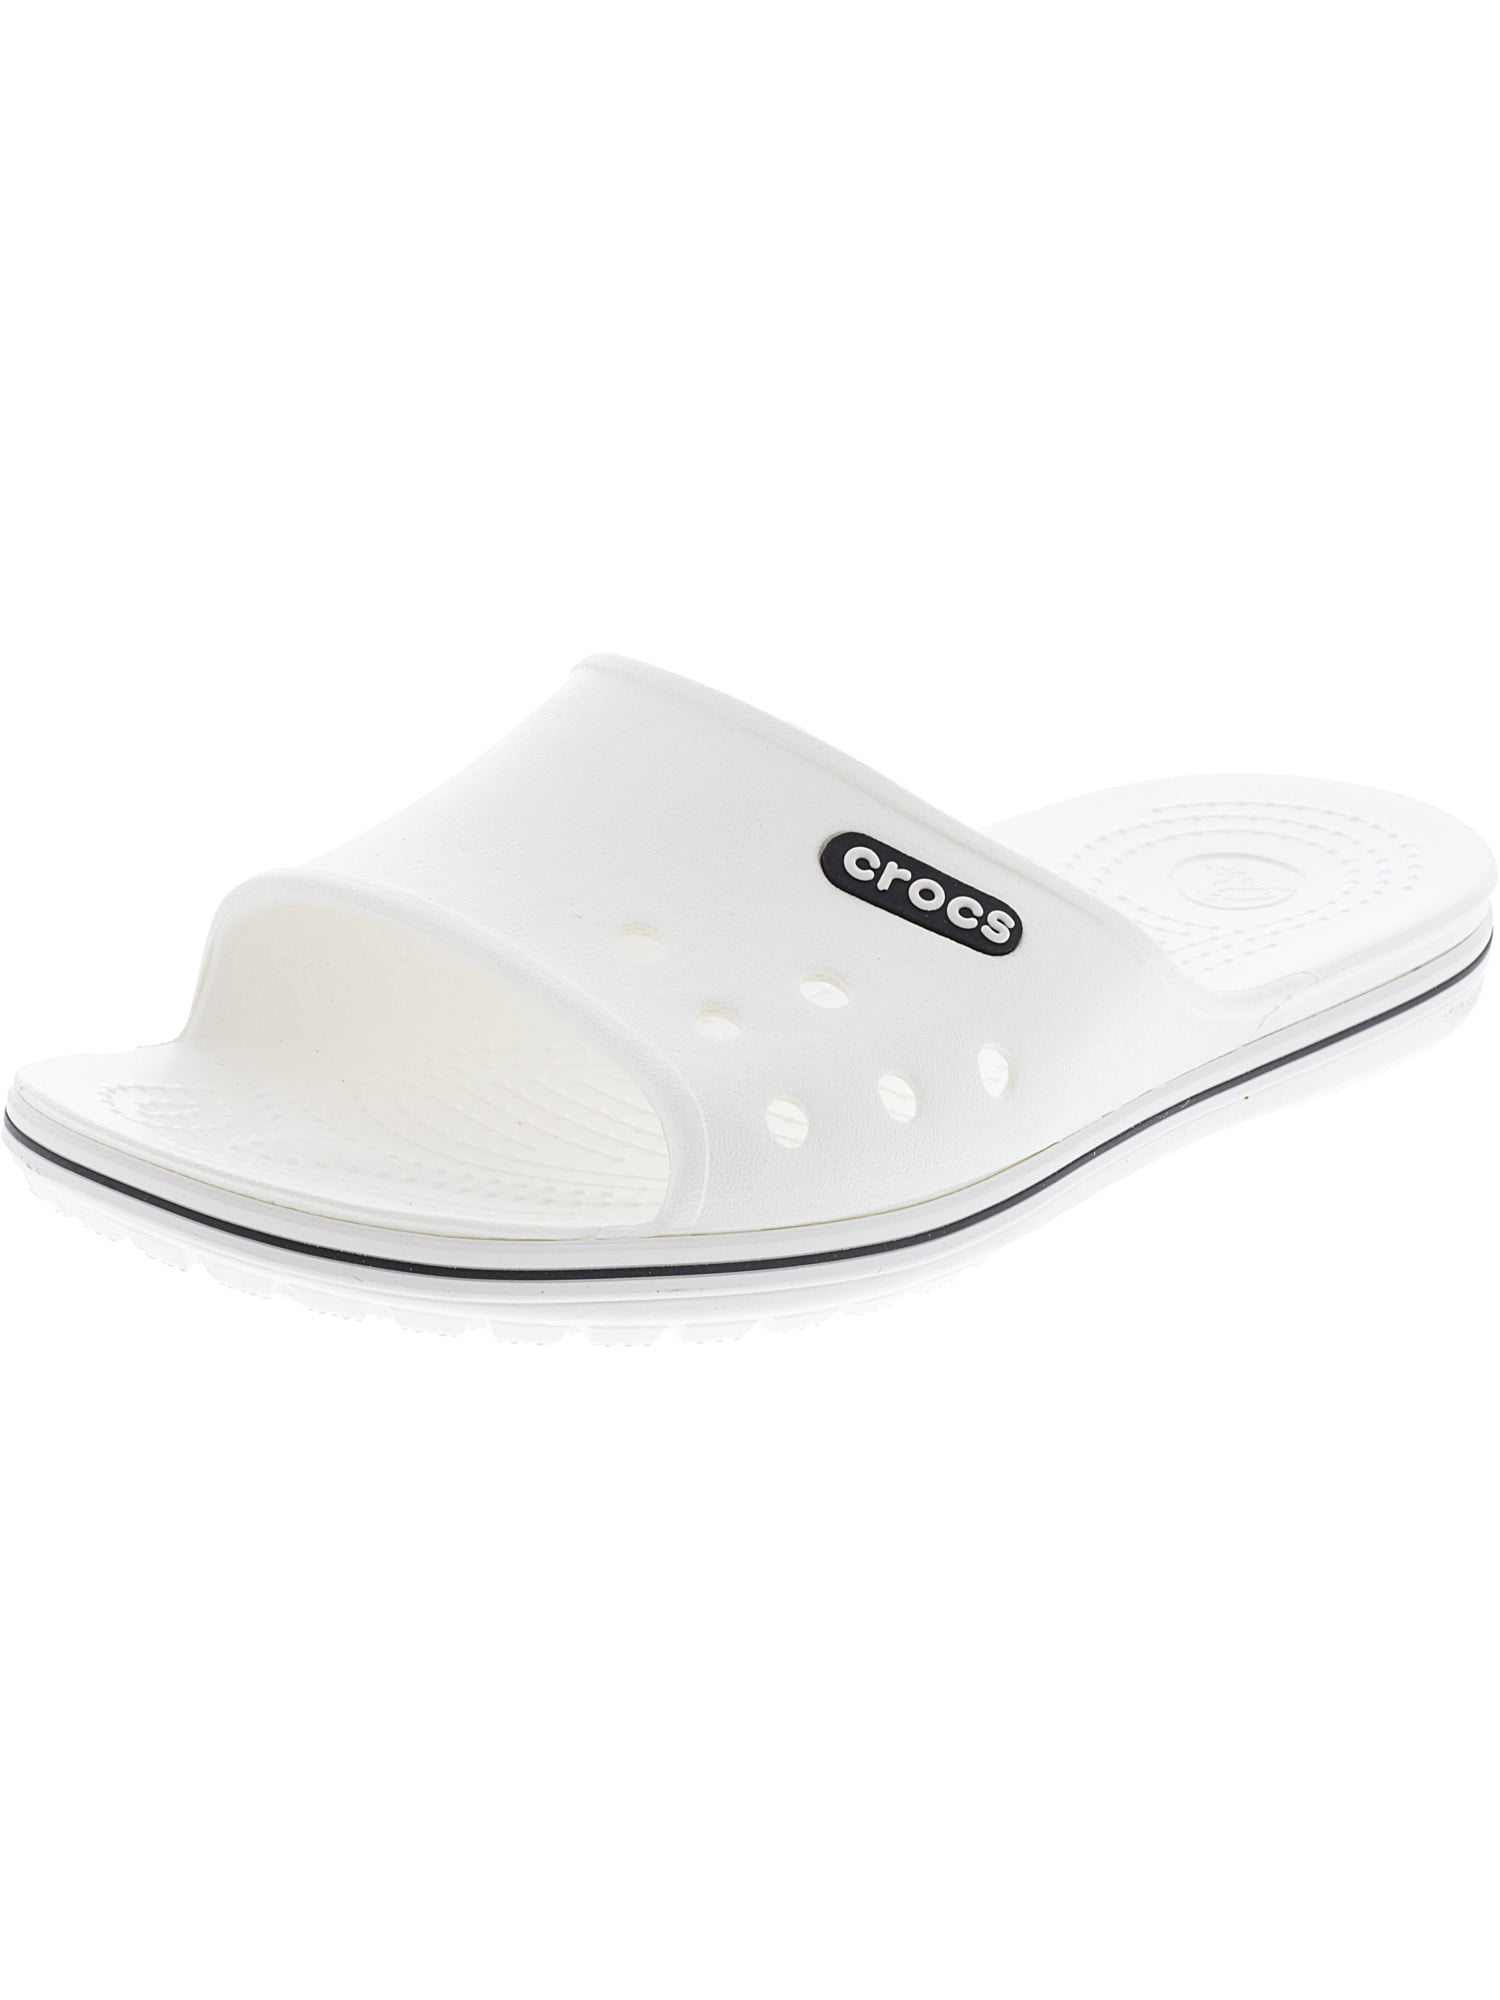 Crocs Mens and Womens Crocband II Slide Sandals Shower Shoes or Water Shoes